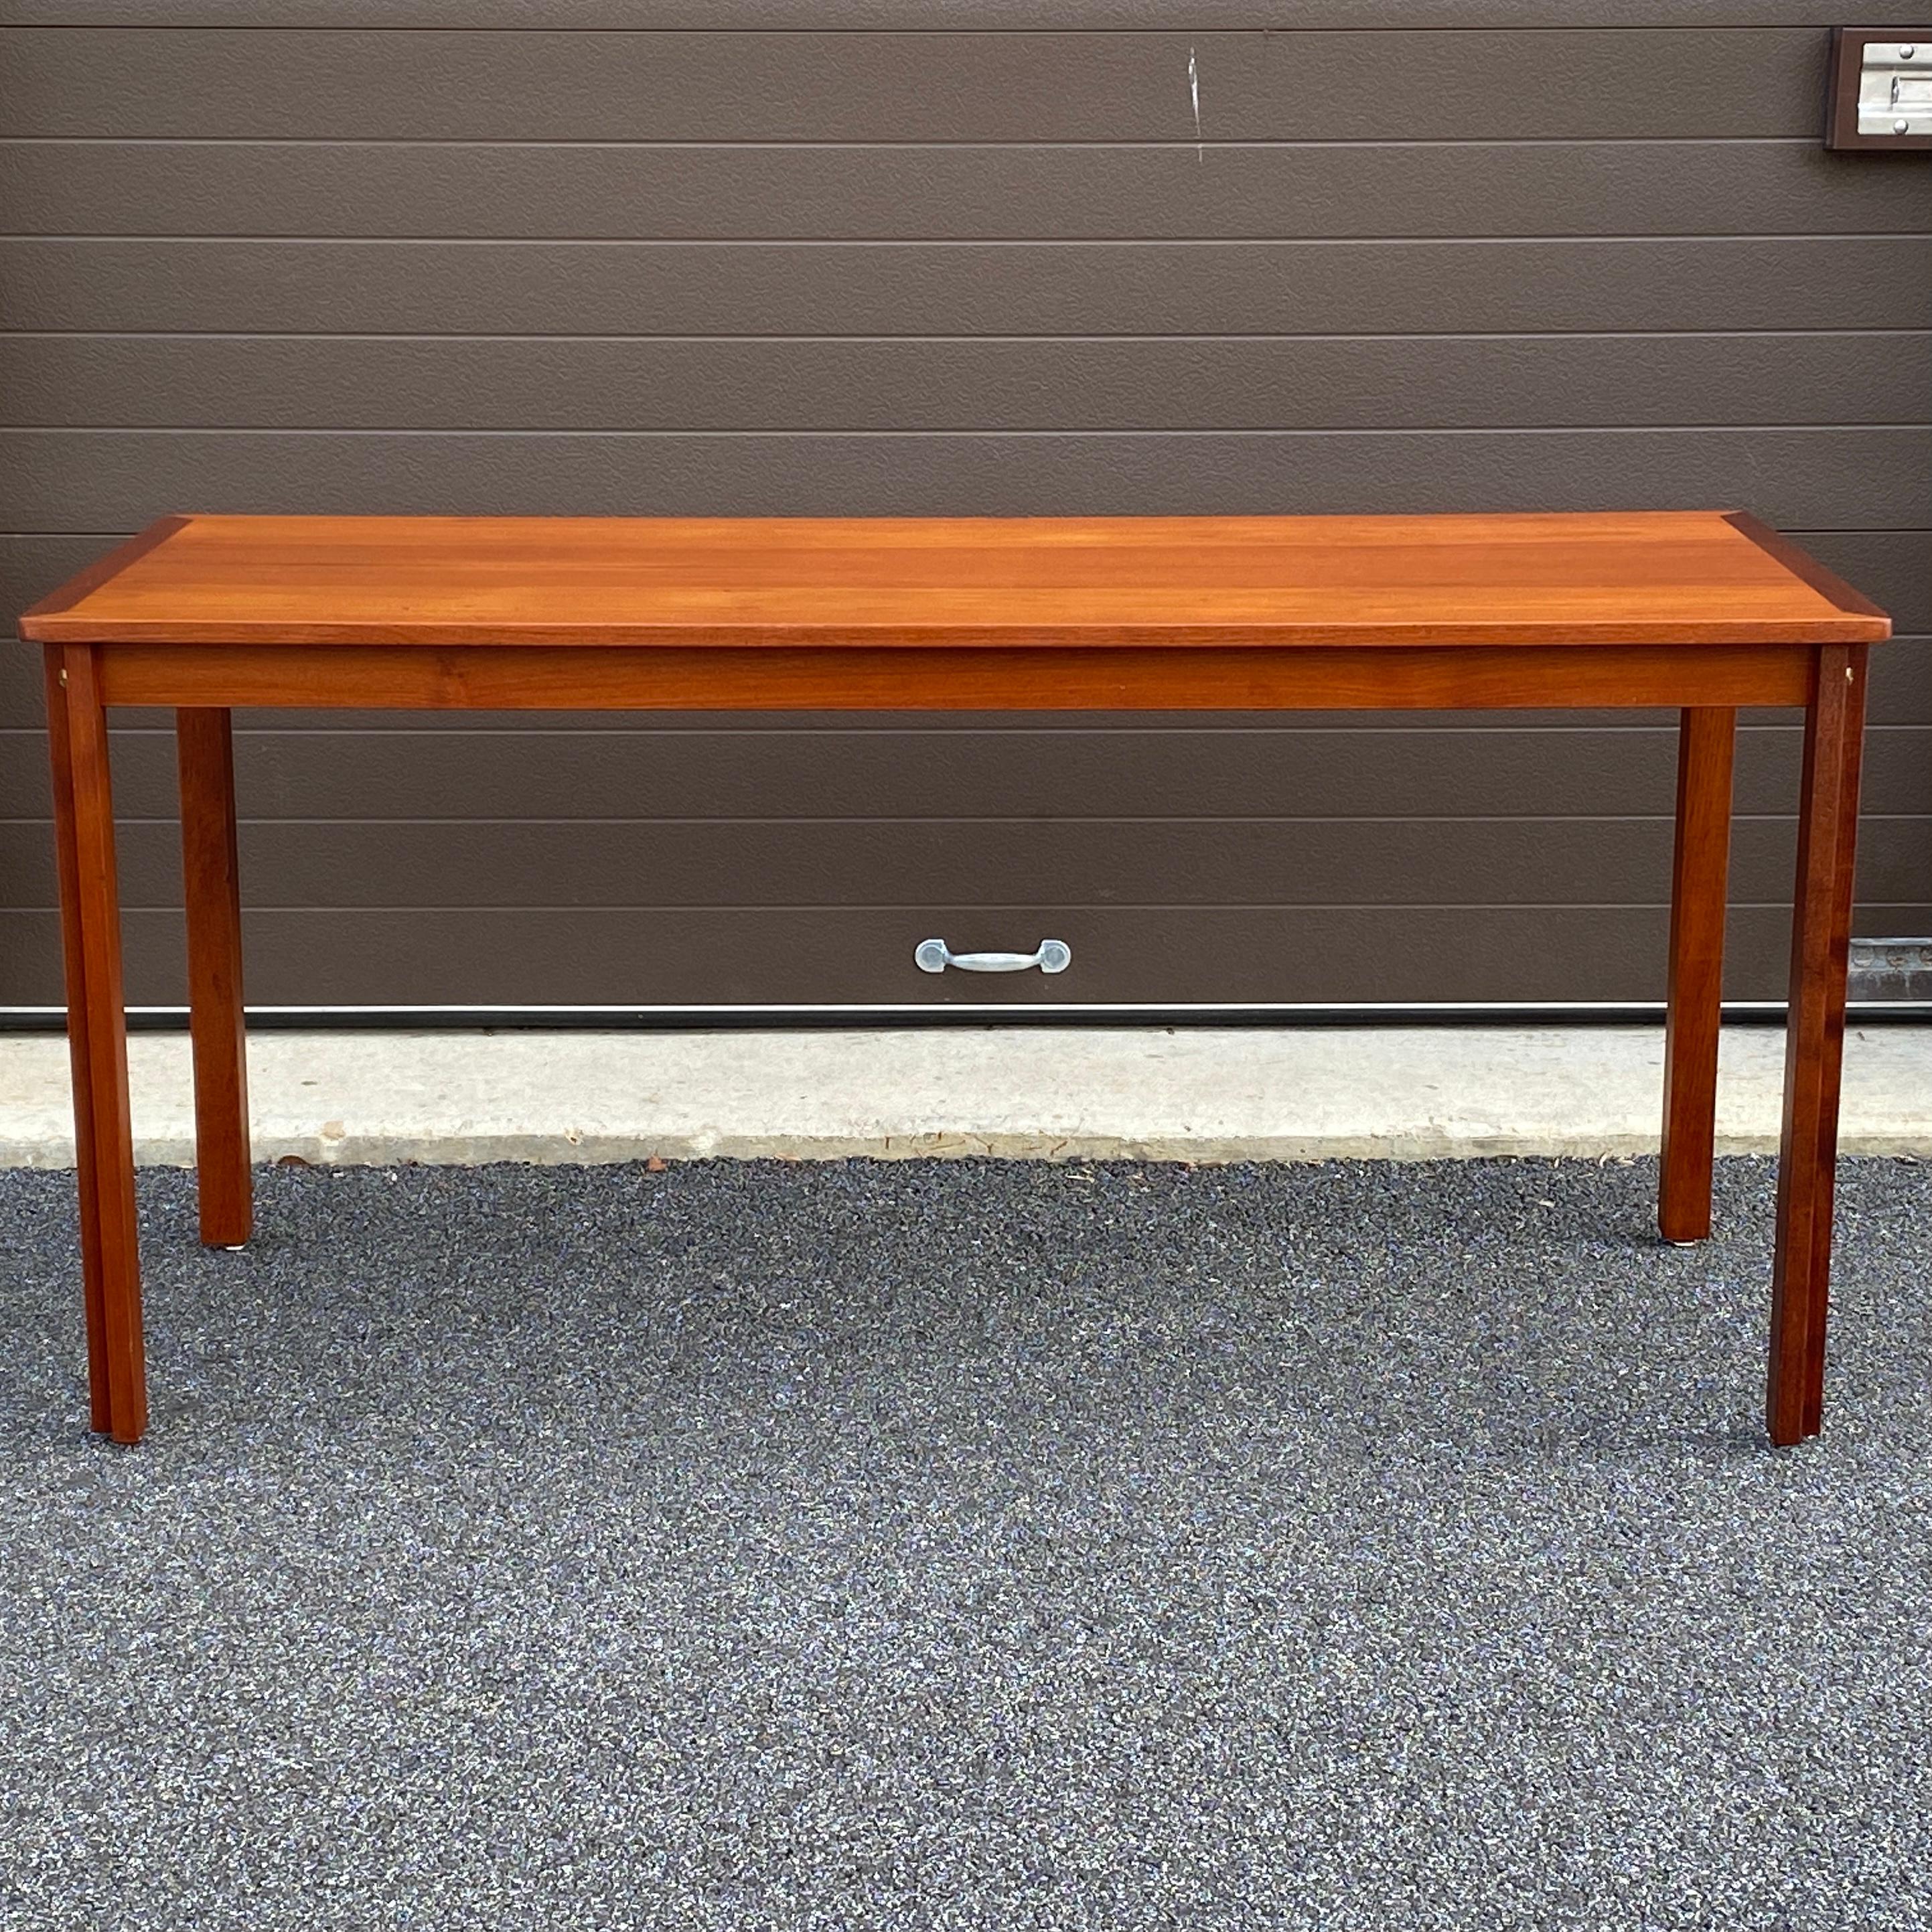 A rare teak writing desk designed by Borge Mogensen circa 1958 featuring L-shaped table legs with exposed brass screw. Stamped underneath.

28.375” table height with the metal feet
25.25” knee clearance.